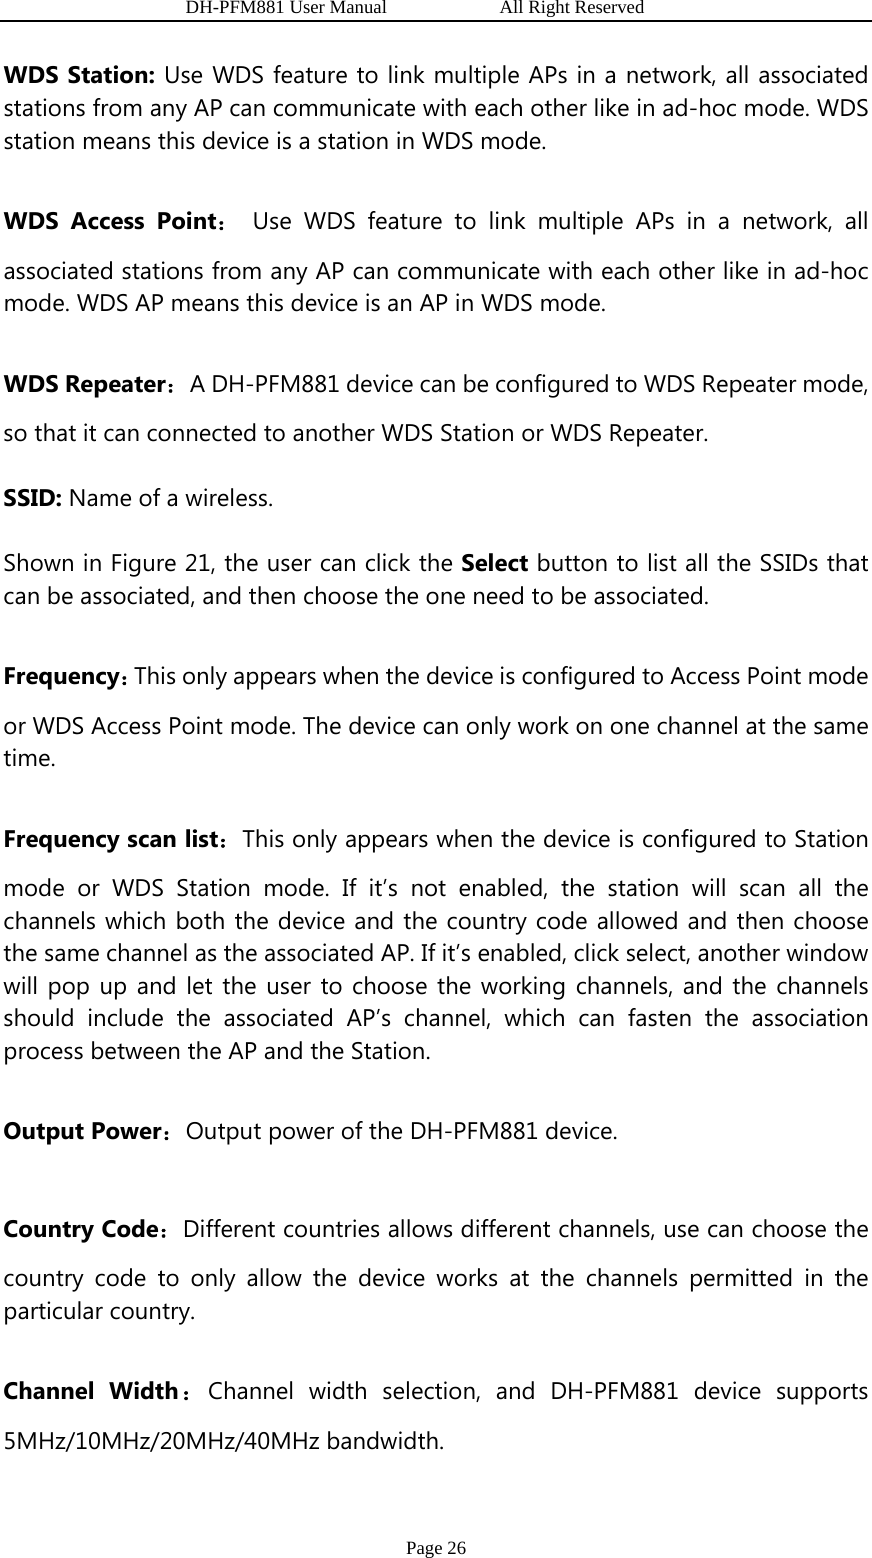                   DH-PFM881 User Manual            All Right Reserved Page 26 WDS Station: Use WDS feature to link multiple APs in a network, all associated stations from any AP can communicate with each other like in ad-hoc mode. WDS station means this device is a station in WDS mode. WDS Access Point： Use WDS feature to link multiple APs in a network, all associated stations from any AP can communicate with each other like in ad-hoc mode. WDS AP means this device is an AP in WDS mode. WDS Repeater：A DH-PFM881 device can be configured to WDS Repeater mode, so that it can connected to another WDS Station or WDS Repeater. SSID: Name of a wireless.   Shown in Figure 21, the user can click the Select button to list all the SSIDs that can be associated, and then choose the one need to be associated. Frequency：This only appears when the device is configured to Access Point mode or WDS Access Point mode. The device can only work on one channel at the same time. Frequency scan list：This only appears when the device is configured to Station mode or WDS Station mode. If it’s not enabled, the station will scan all the channels which both the device and the country code allowed and then choose the same channel as the associated AP. If it’s enabled, click select, another window will pop up and let the user to choose the working channels, and the channels should include the associated AP’s channel, which can fasten the association process between the AP and the Station. Output Power：Output power of the DH-PFM881 device.   Country Code：Different countries allows different channels, use can choose the country code to only allow the device works at the channels permitted in the particular country. Channel Width：Channel width selection, and DH-PFM881 device supports 5MHz/10MHz/20MHz/40MHz bandwidth. 